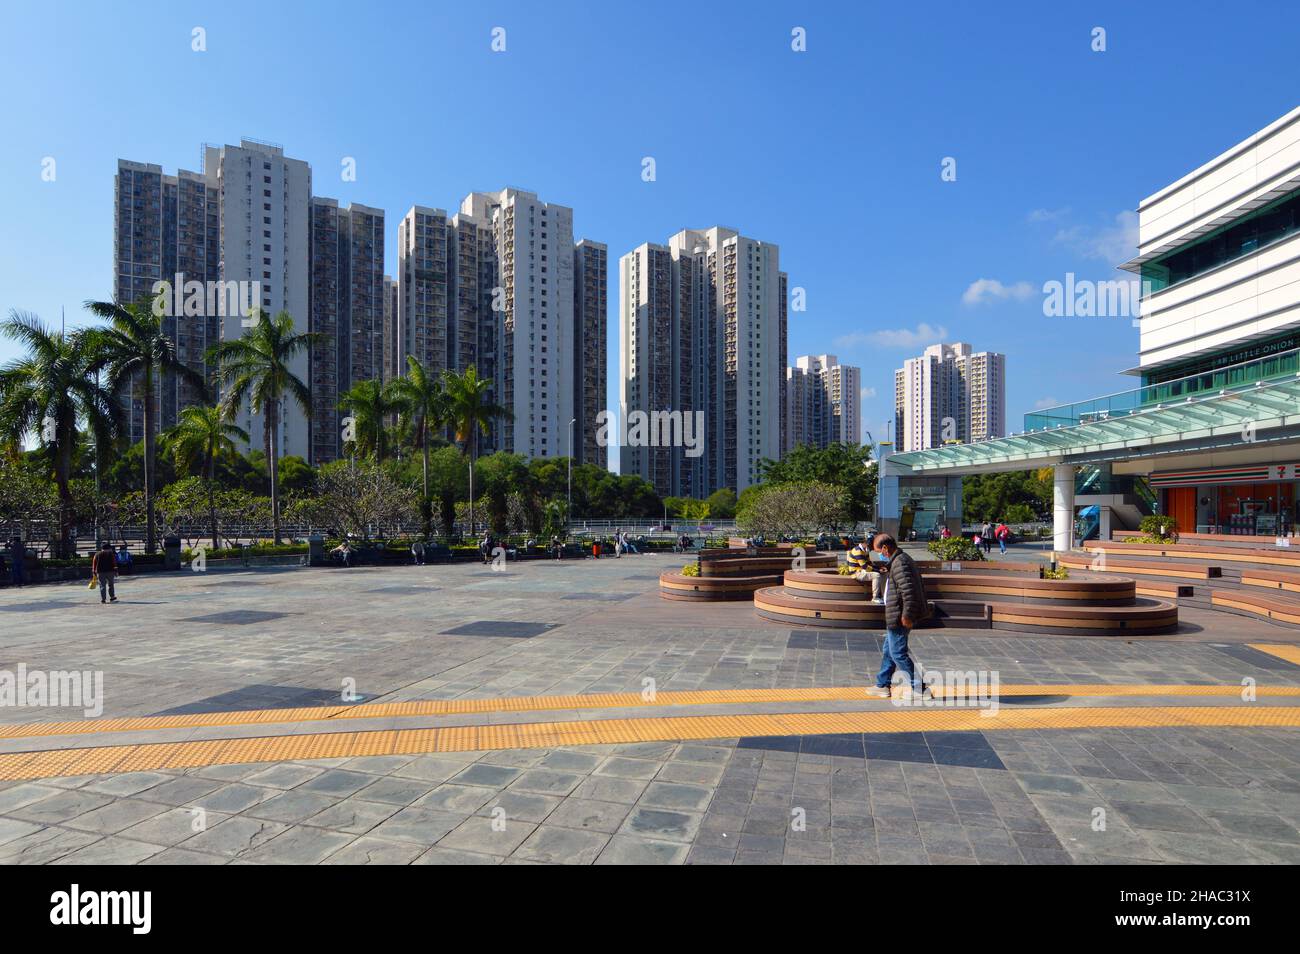 Public plaza outside Sau Mau Ping Shopping Centre (秀茂坪商場) in Sau Mau Ping, Kowloon, Hong Kong with Hiu Lai Court (曉麗苑) in background Stock Photo